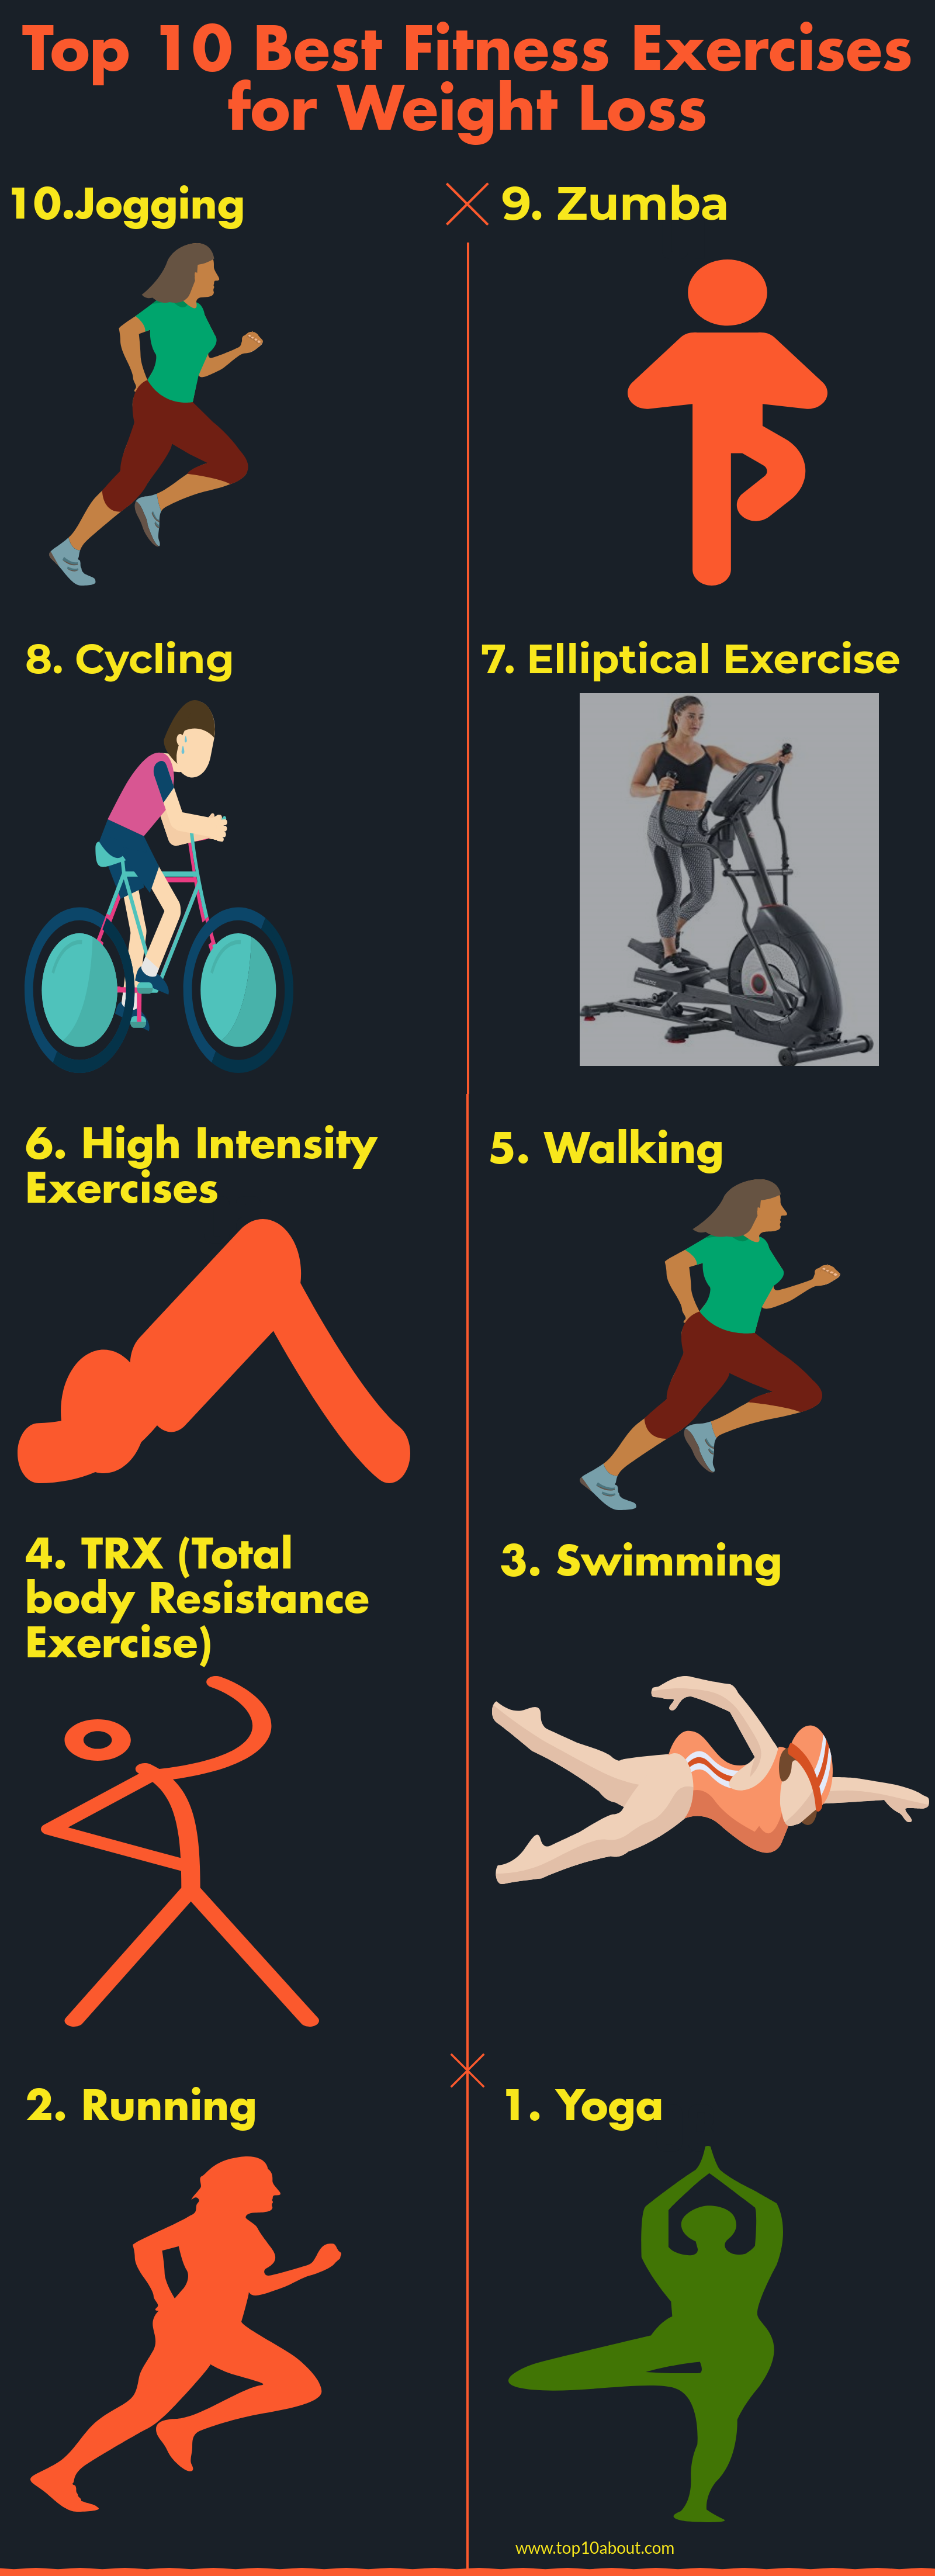 Top 10 Best Fitness Exercises for Weight Loss